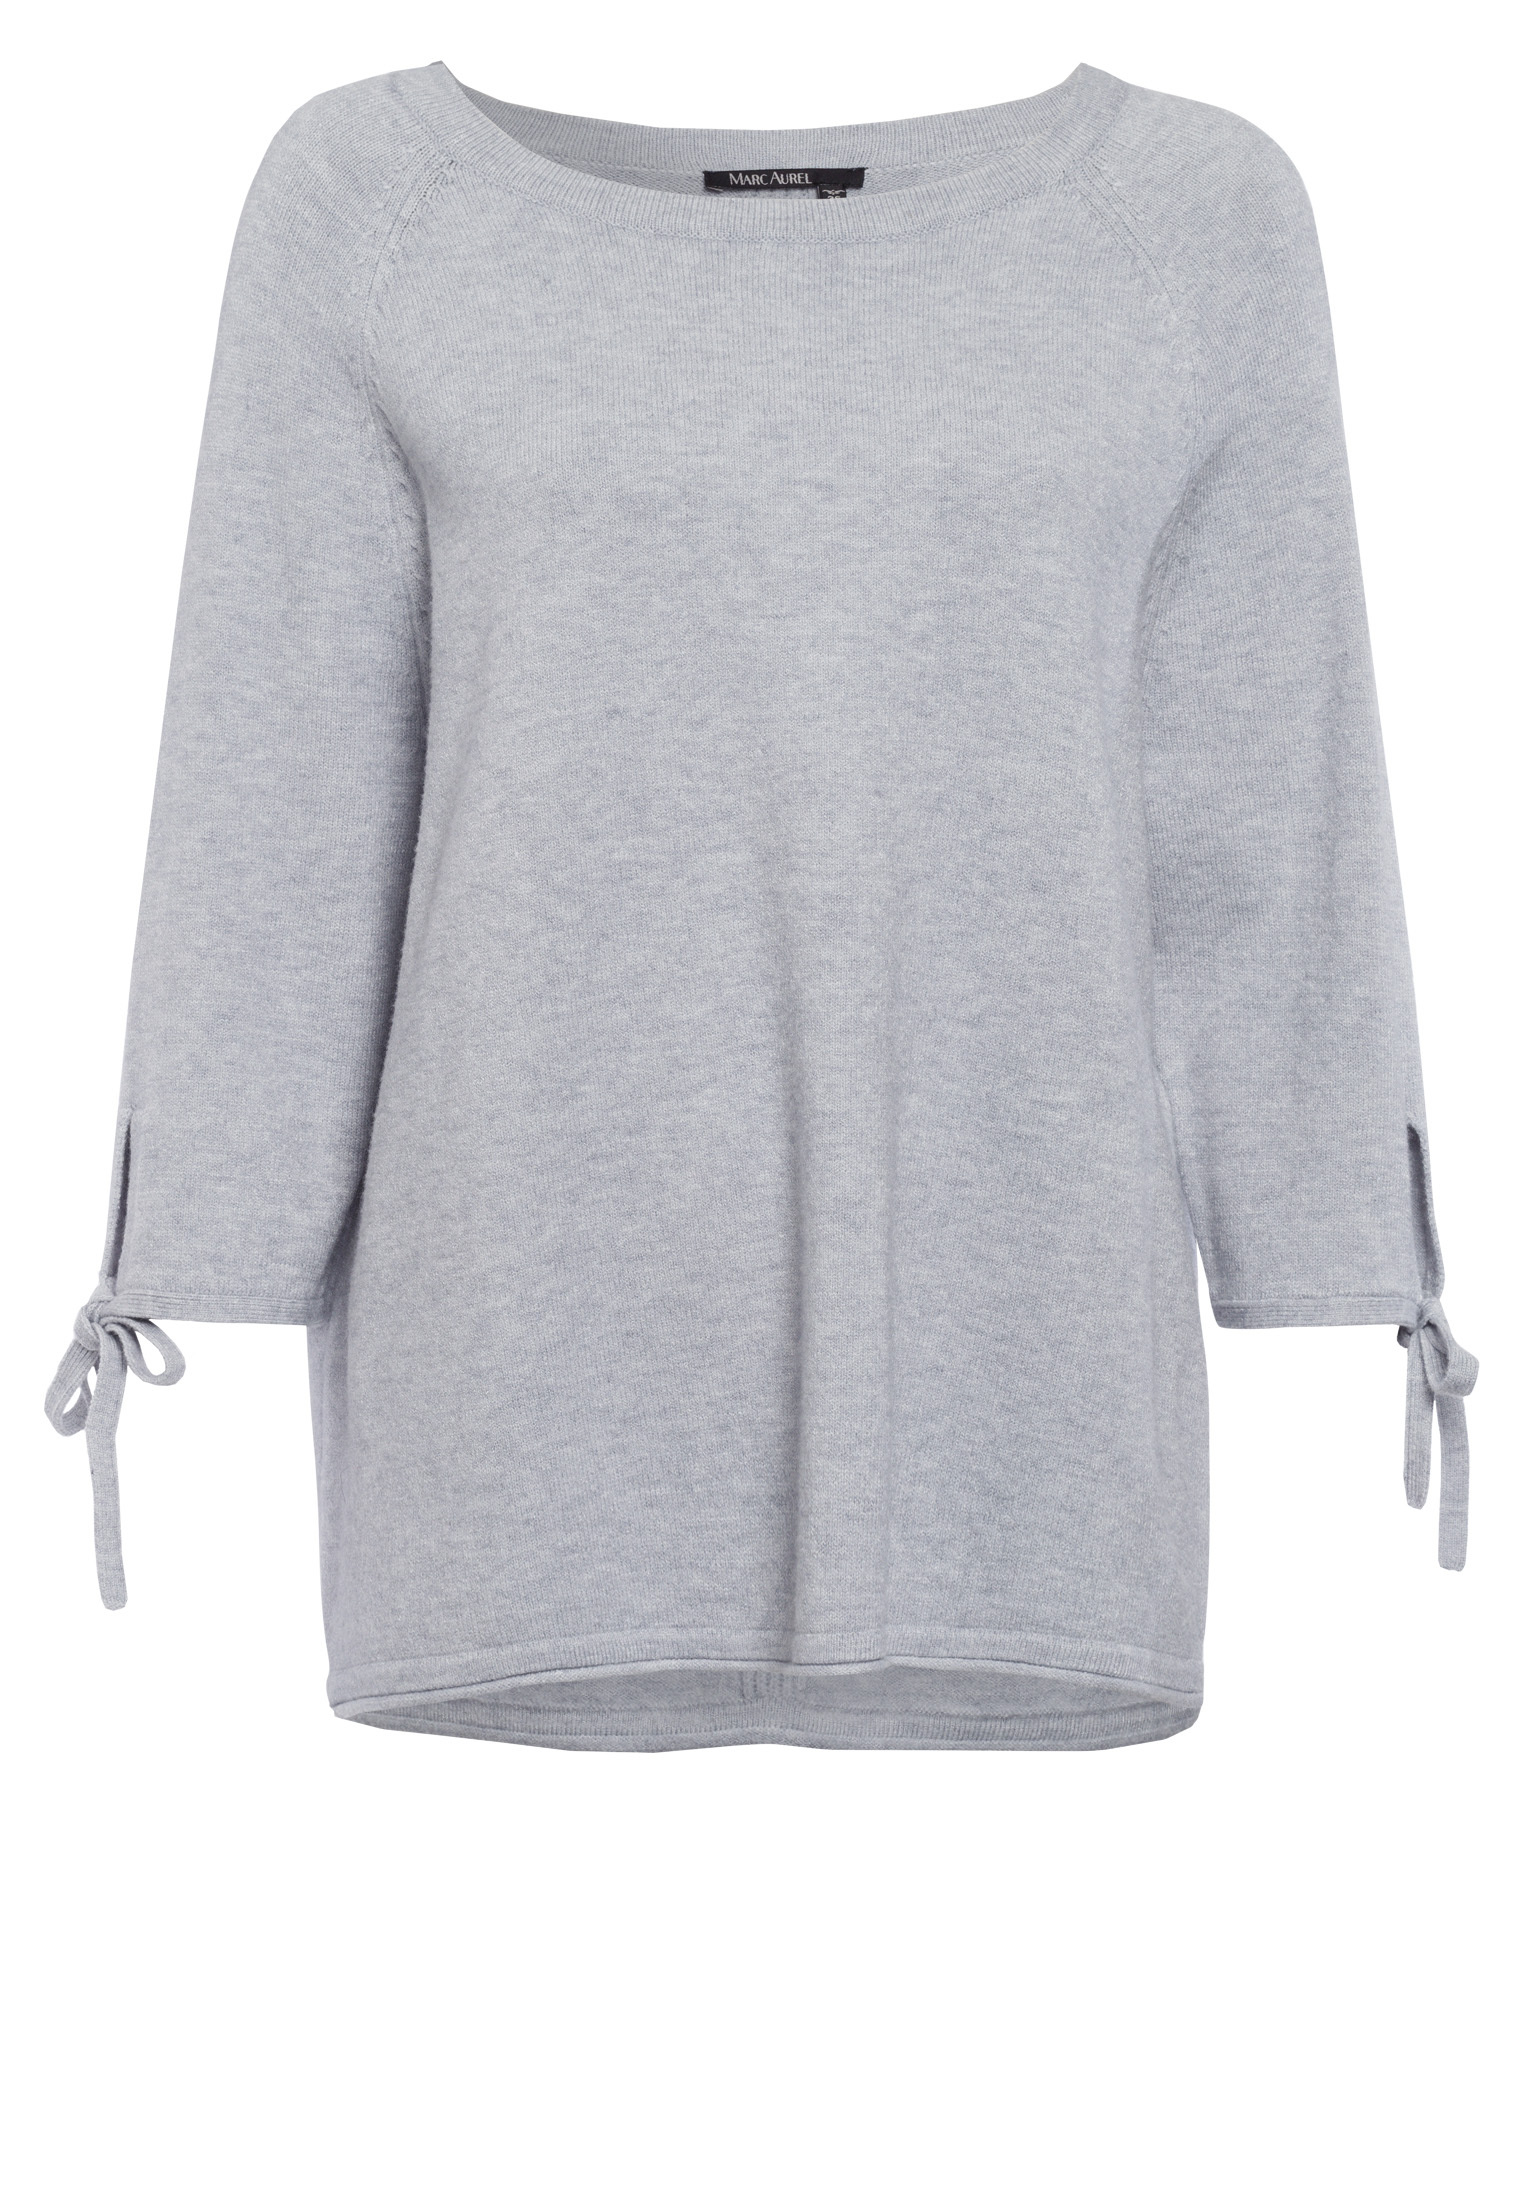 Jumper with elastic band on sleeve | Knitwear | Fashion